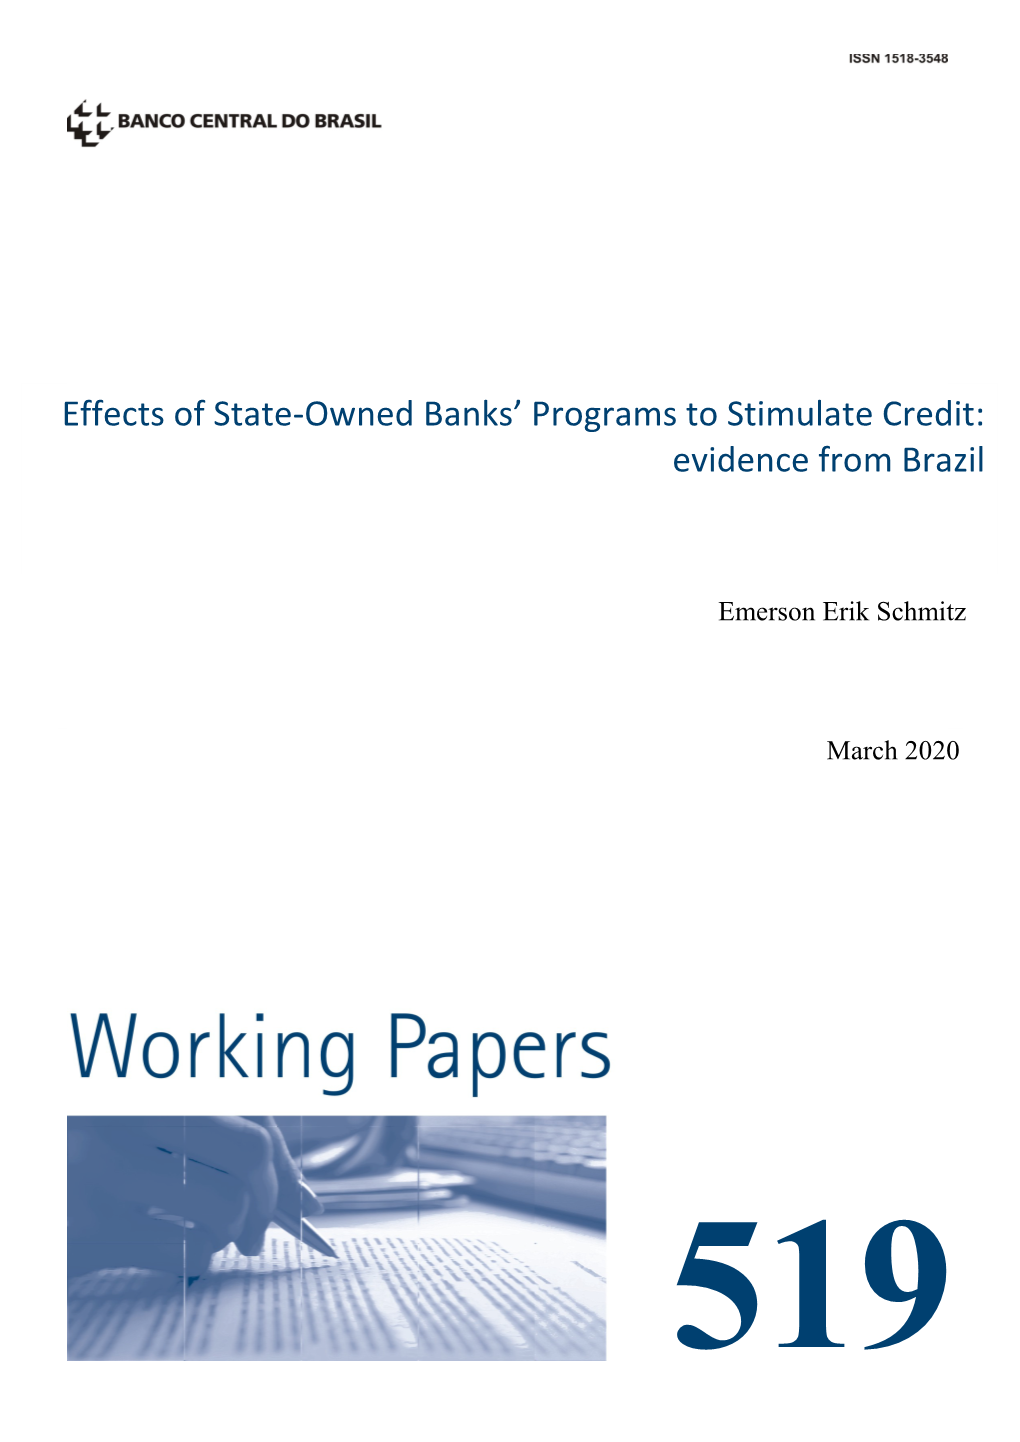 Effects of State-Owned Banks' Programs to Stimulate Credit